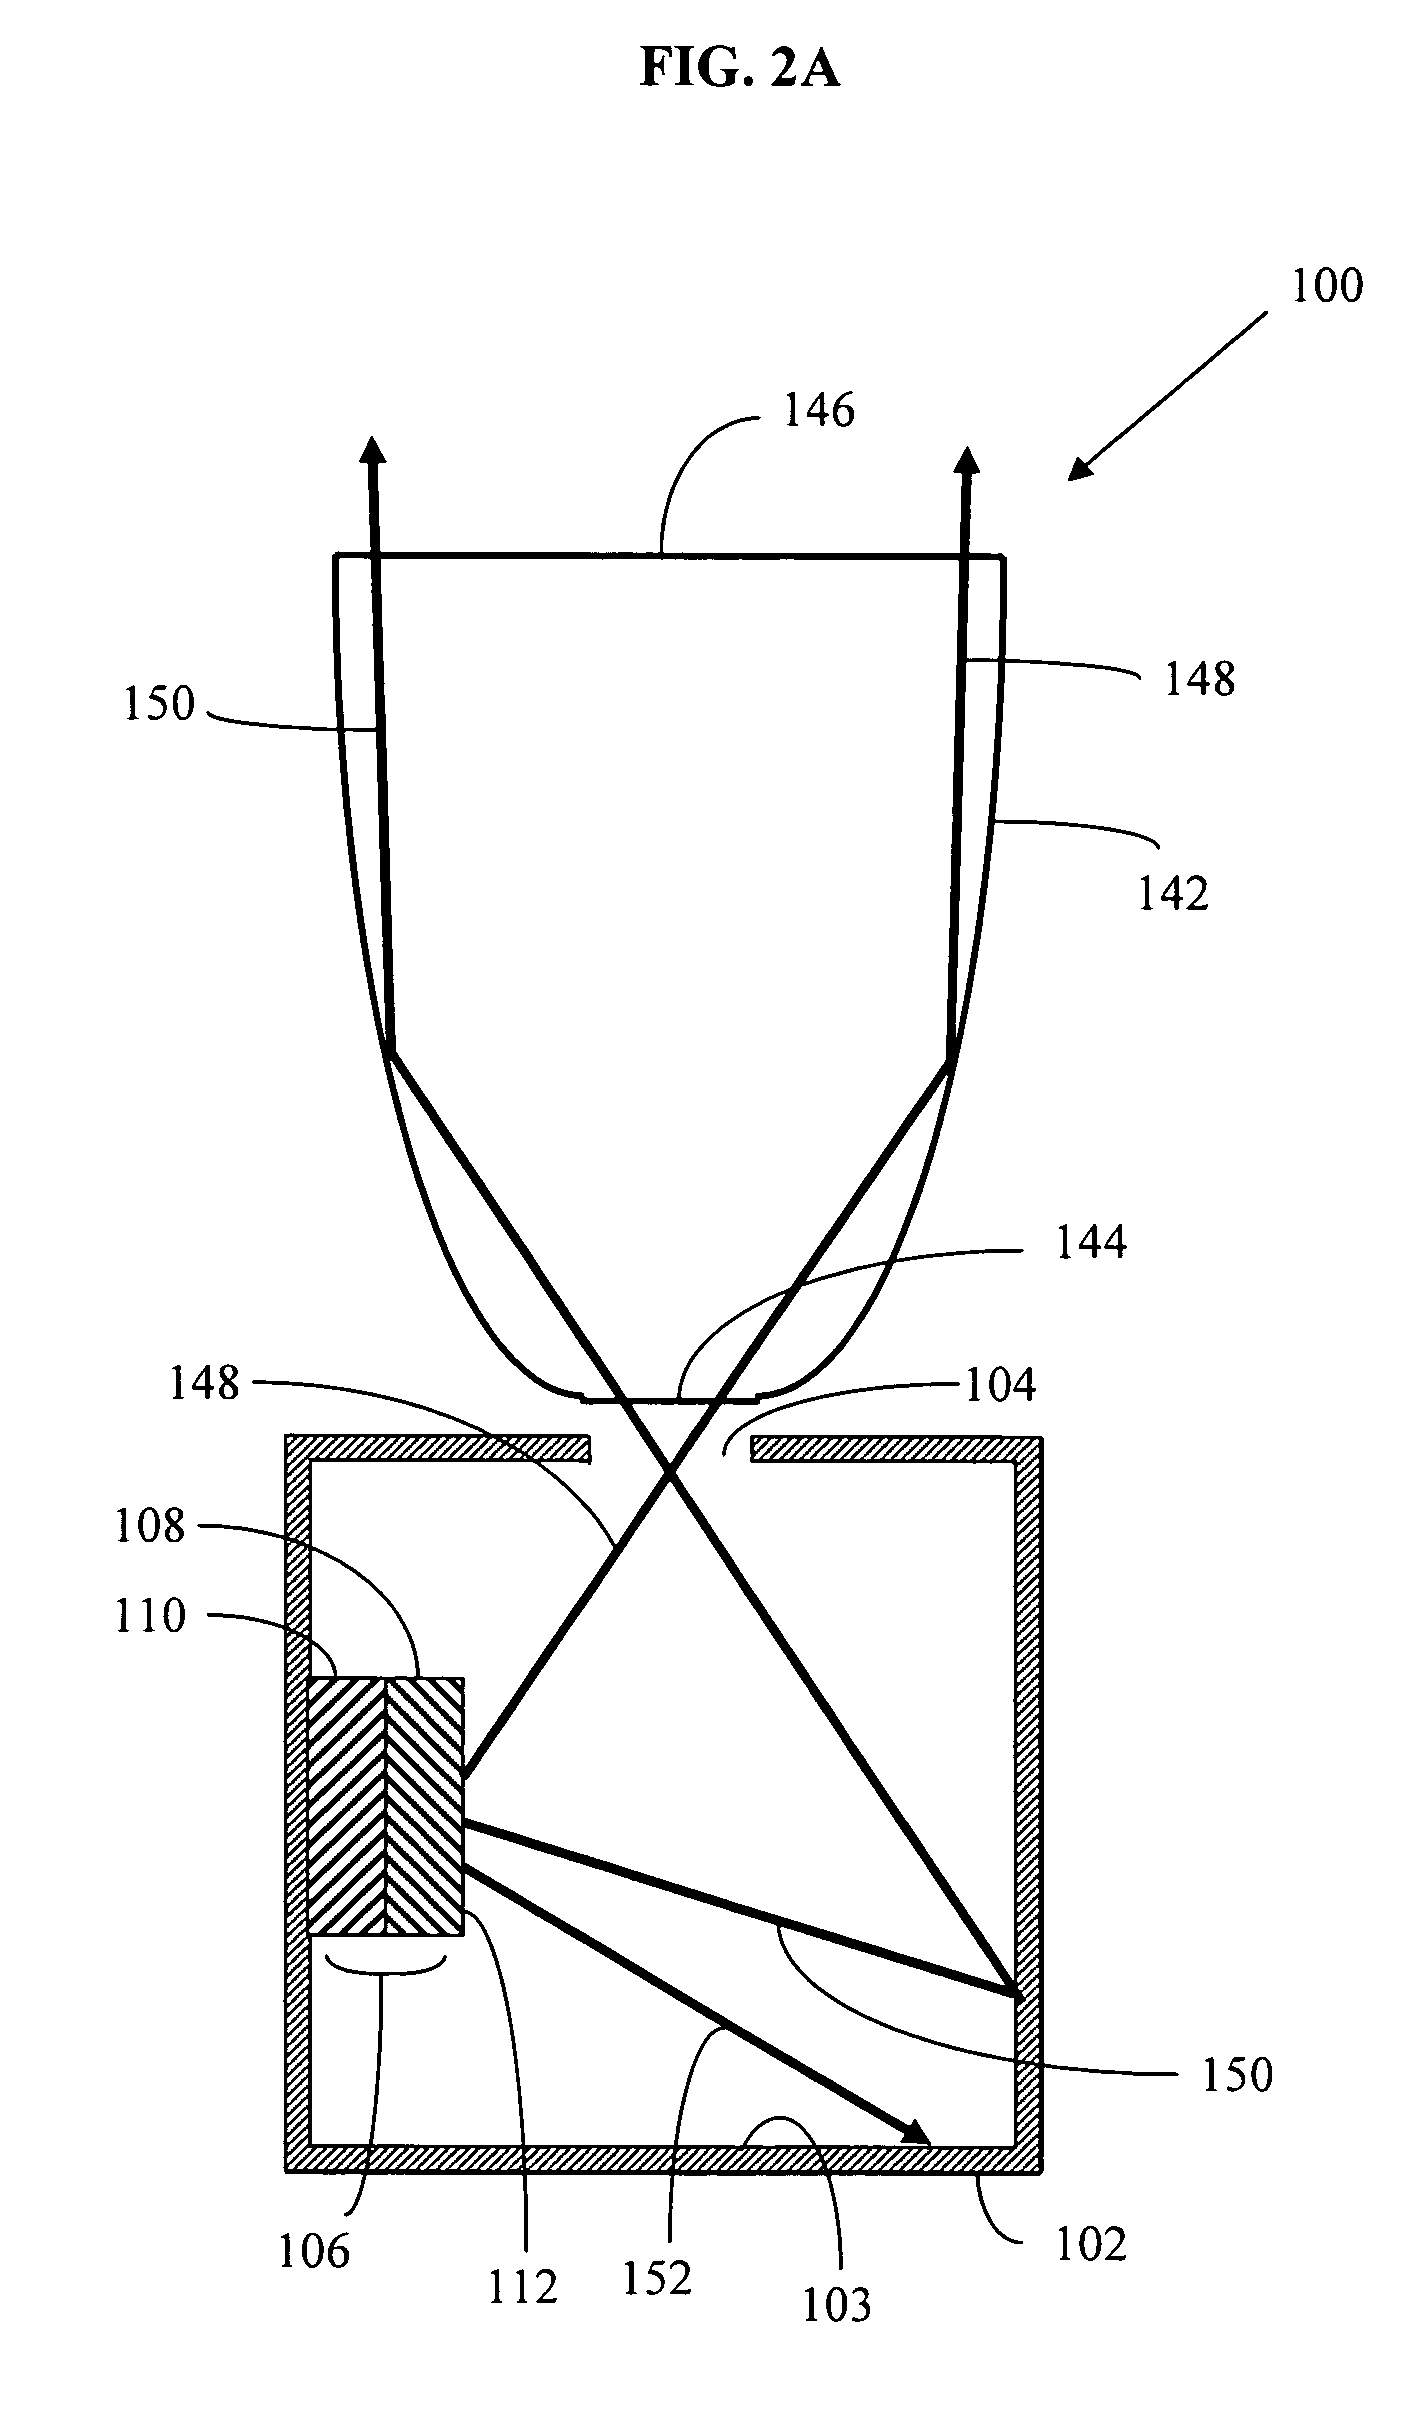 Projection display systems utilizing color scrolling and light emitting diodes